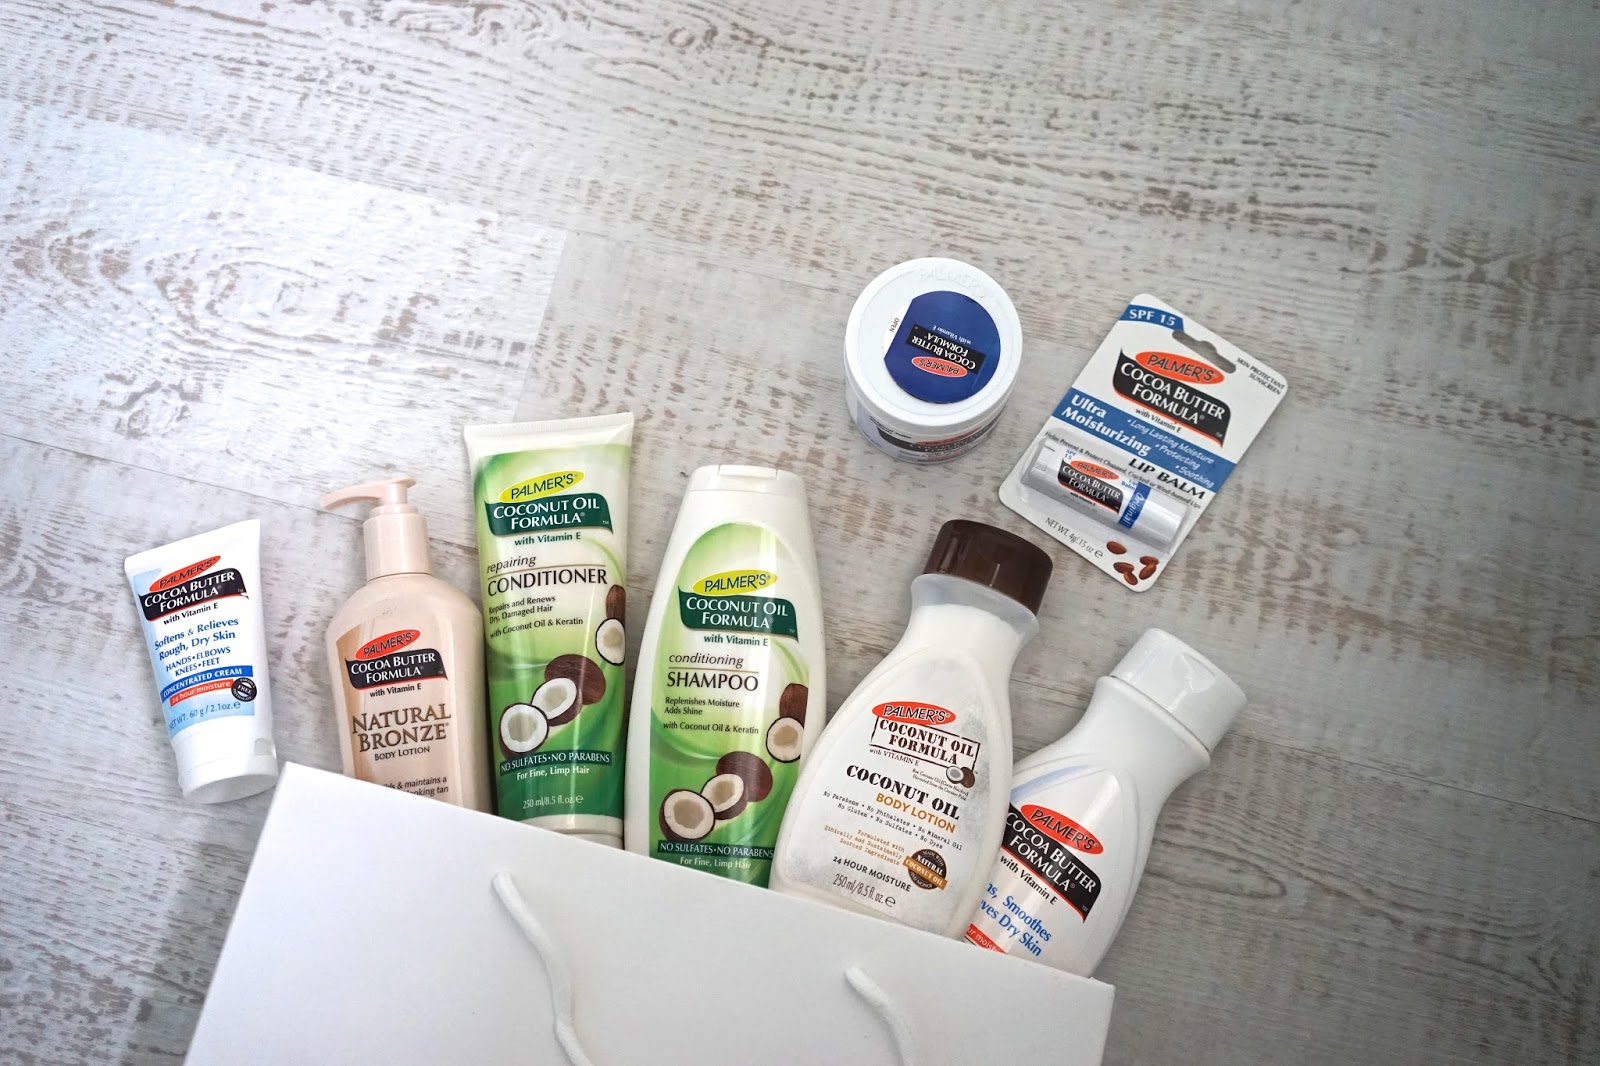 Palmer's Coconut Oil Formula Collection Giveaway